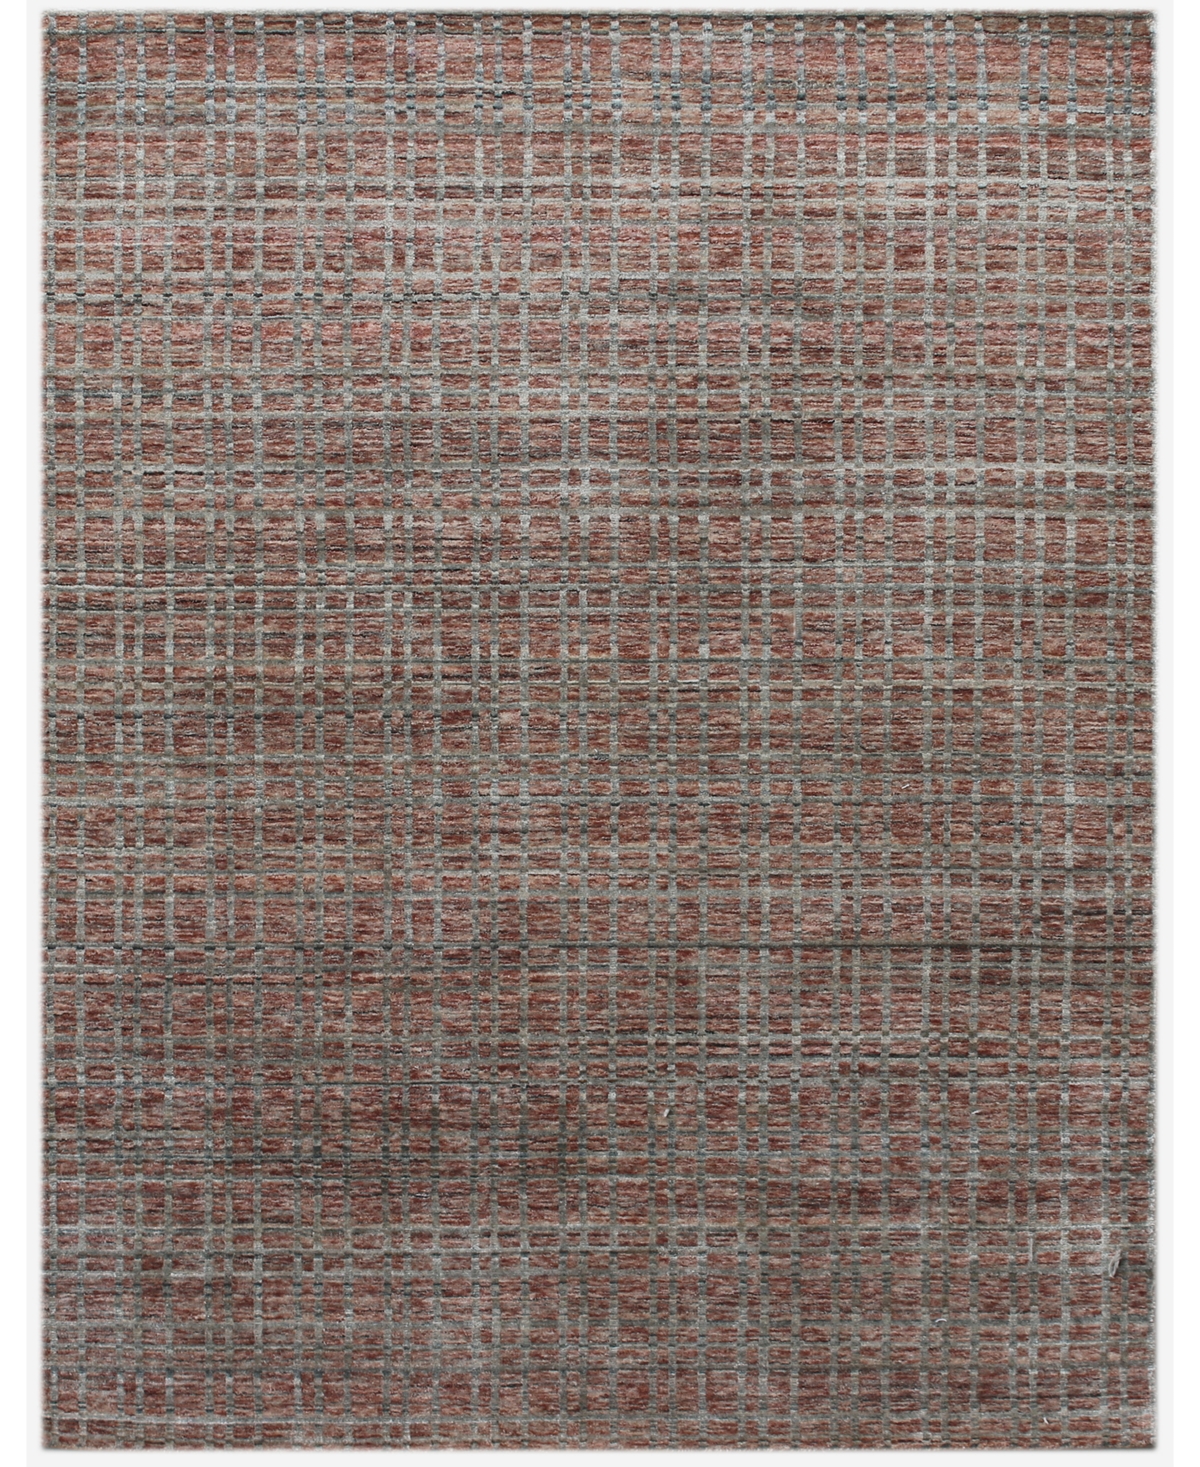 Amer Rugs Paradise Patrice Area Rug, 9' X 12' In Brick